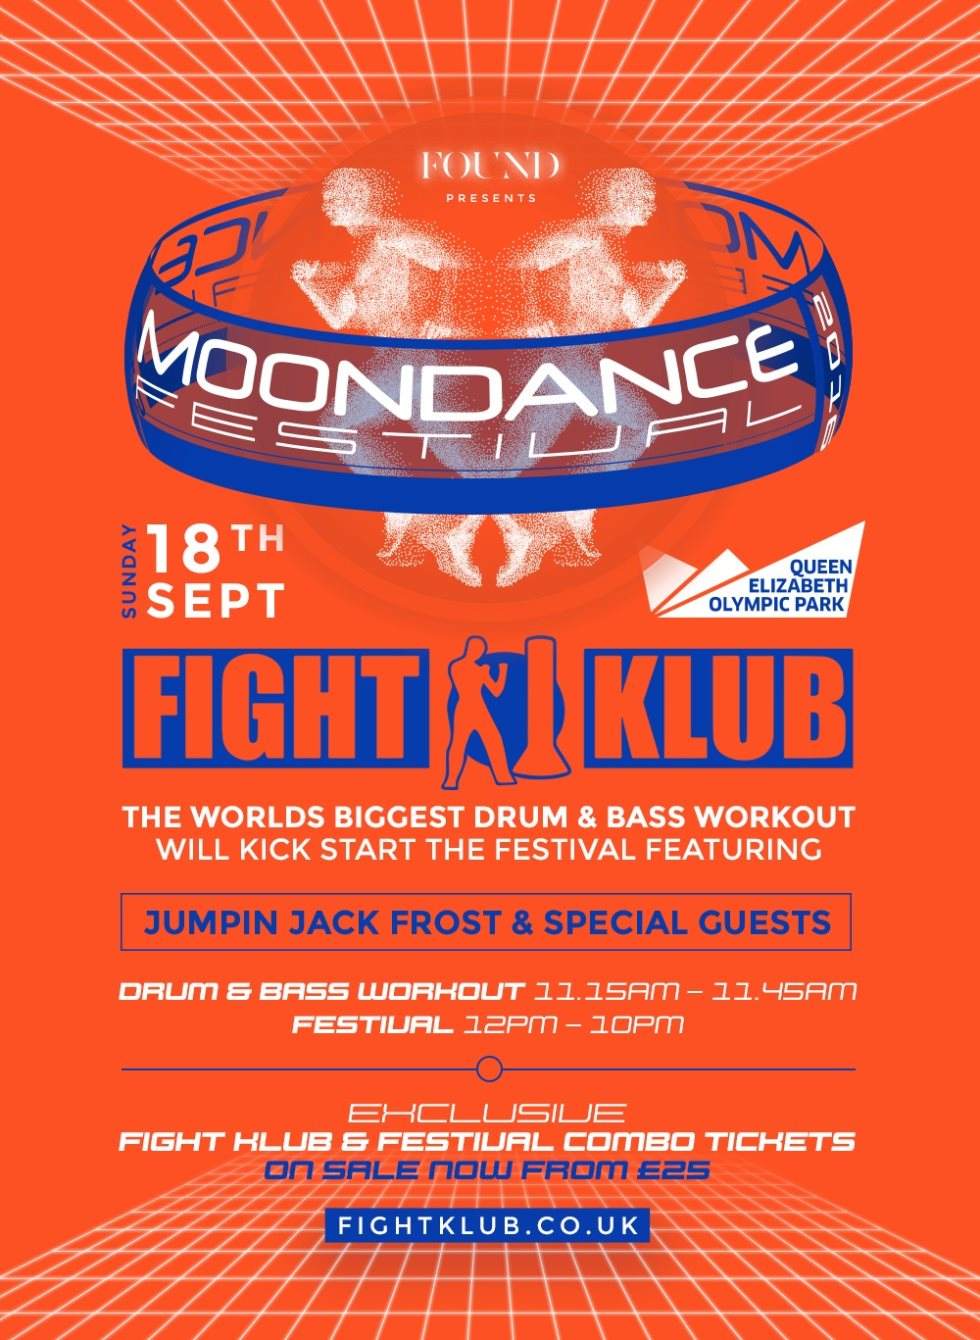 The World's Biggest Drum & Bass Work out at Moondance Festival 2016 - Página frontal